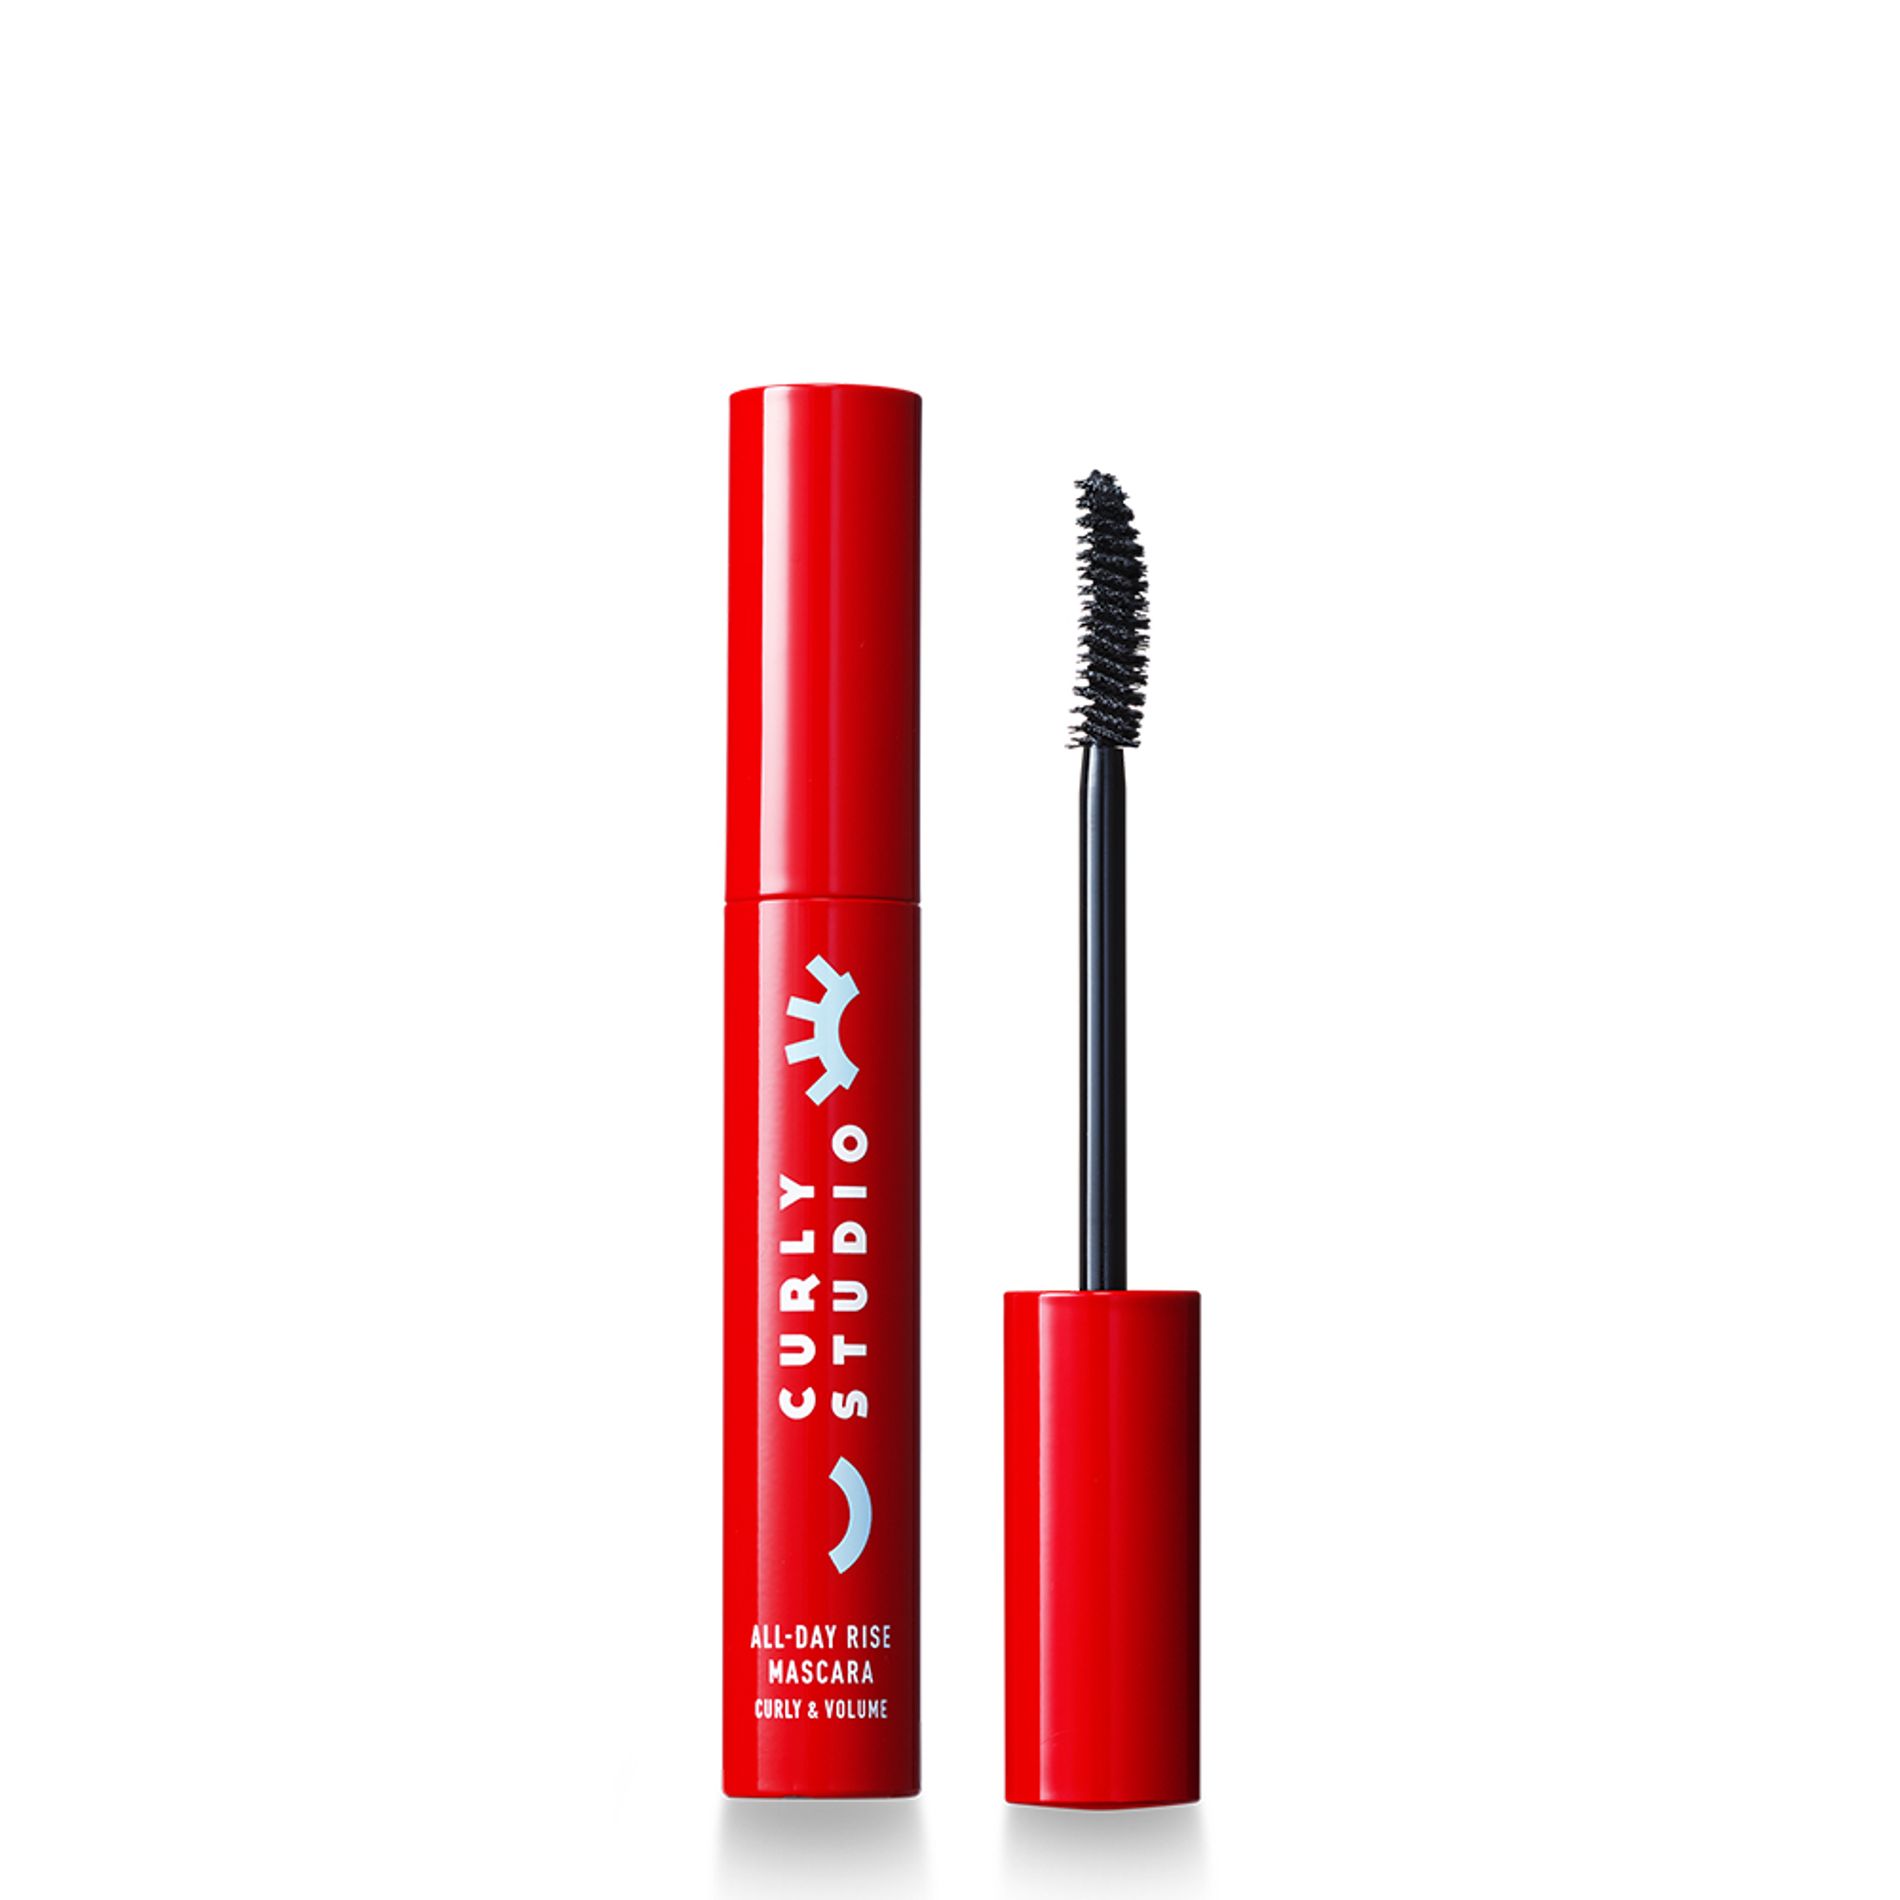 mascara-lam-cong-day-mi-curly-studio-all-day-rise-mascara-01-curly-volume-8g-7